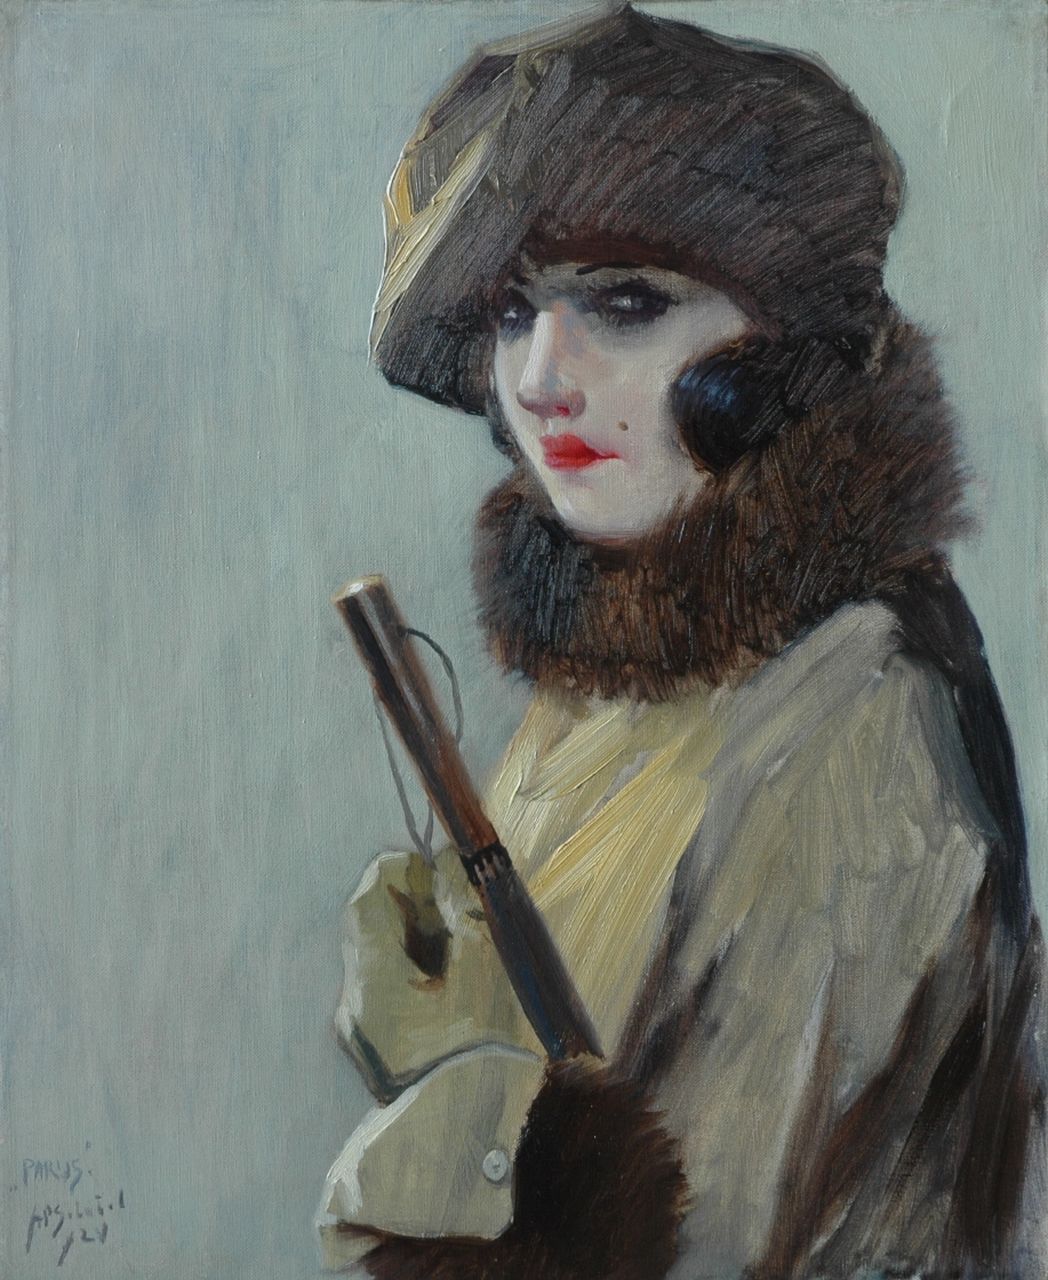 Schotel A.P.  | Anthonie Pieter Schotel, Parisian lady, oil on canvas 56.5 x 46.3 cm, signed l.l. and dated '24 l.l. and 1924 on the reverse